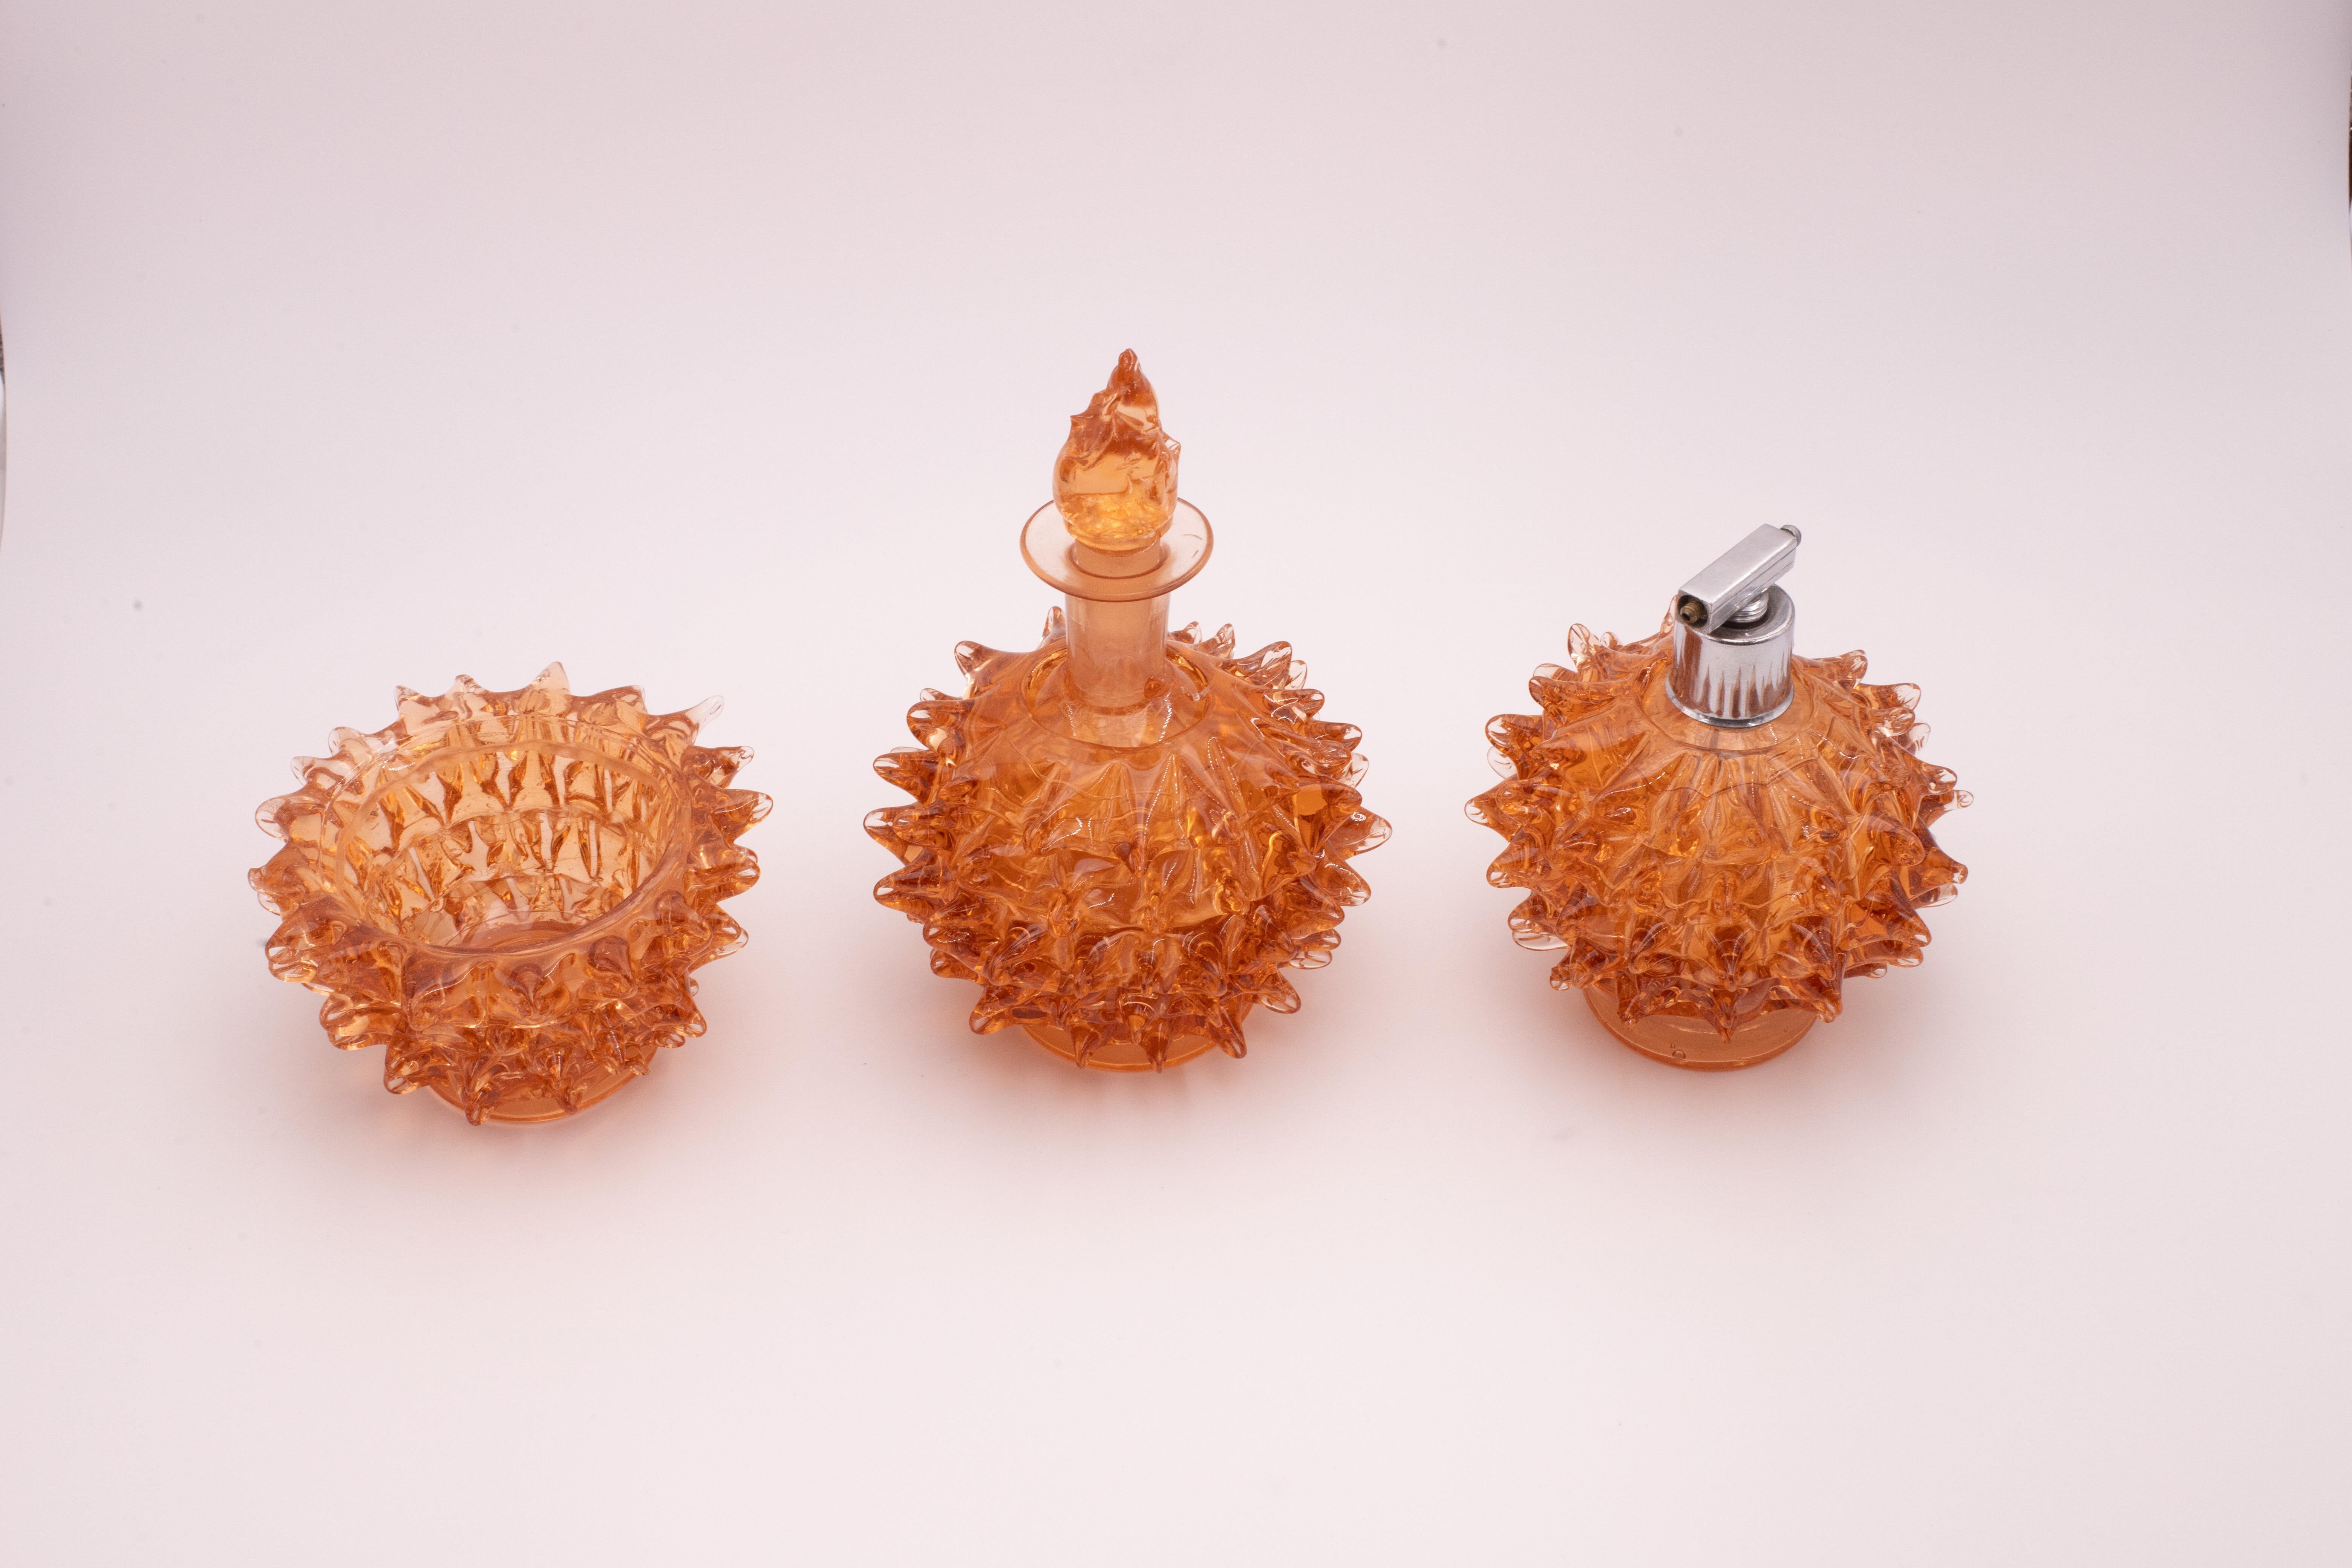 Rare Set of 3 Amber Rostrato Murano Glass Vases by Barovier & Toso, 1940s For Sale 6